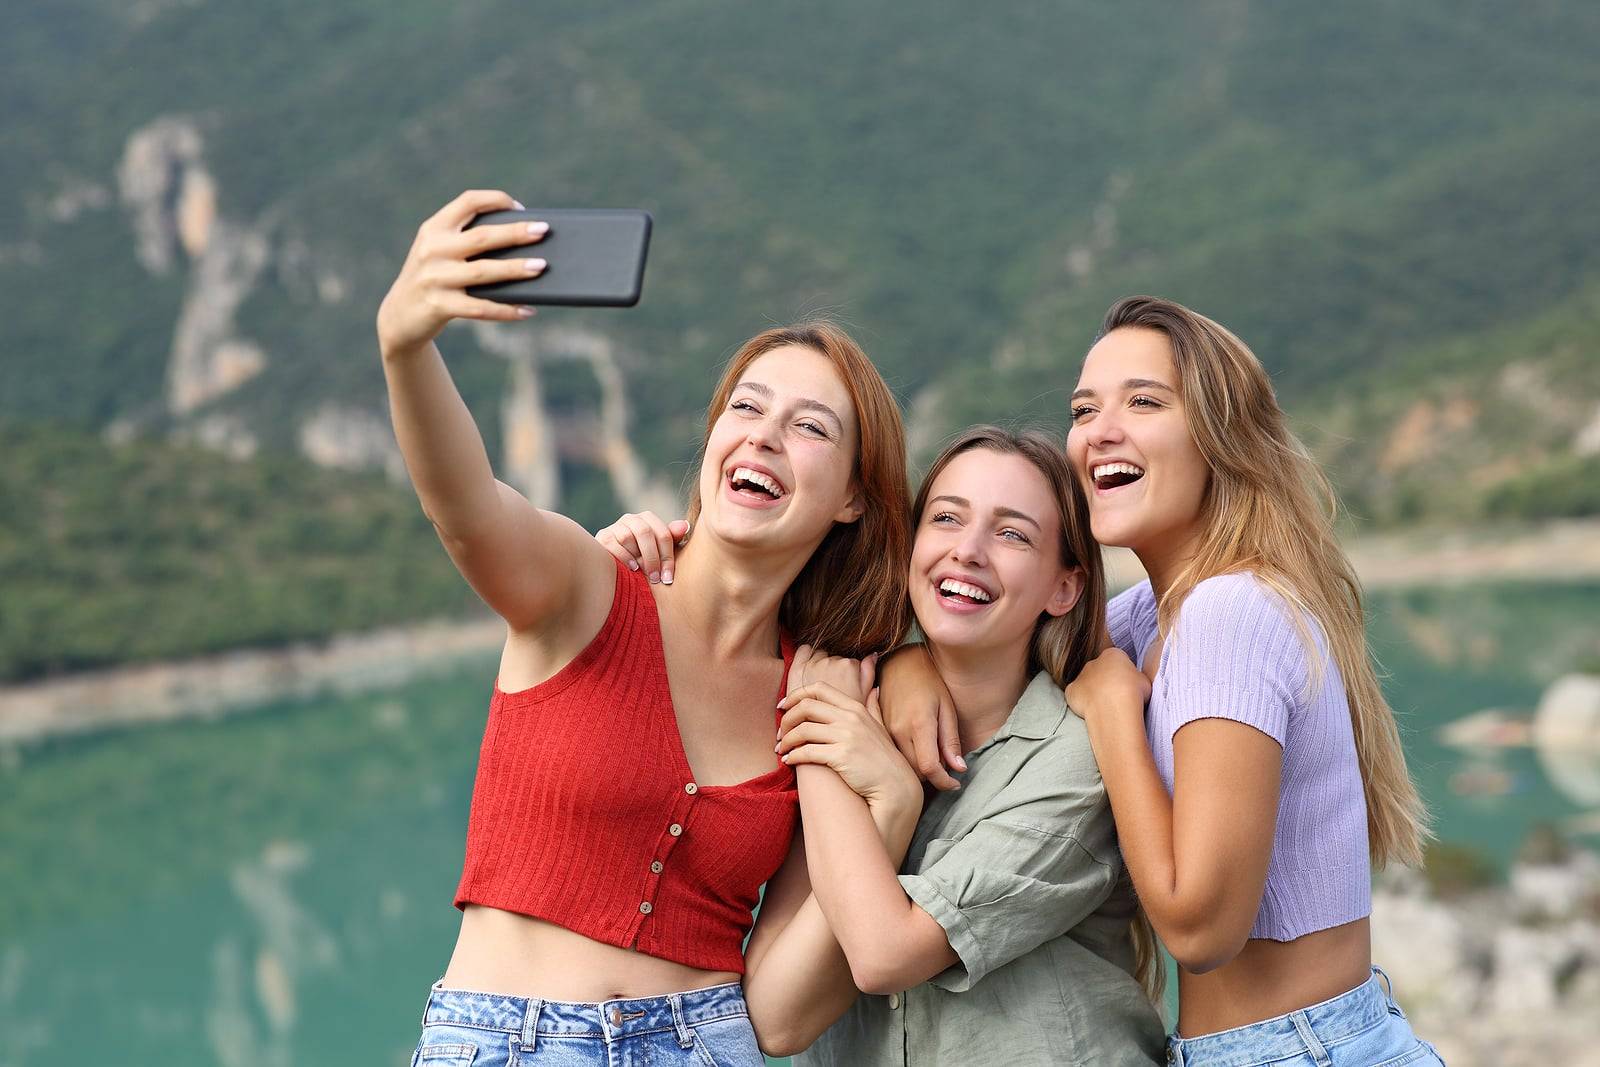 Number of Deaths by Selfie Is Rising at Alarming Rates